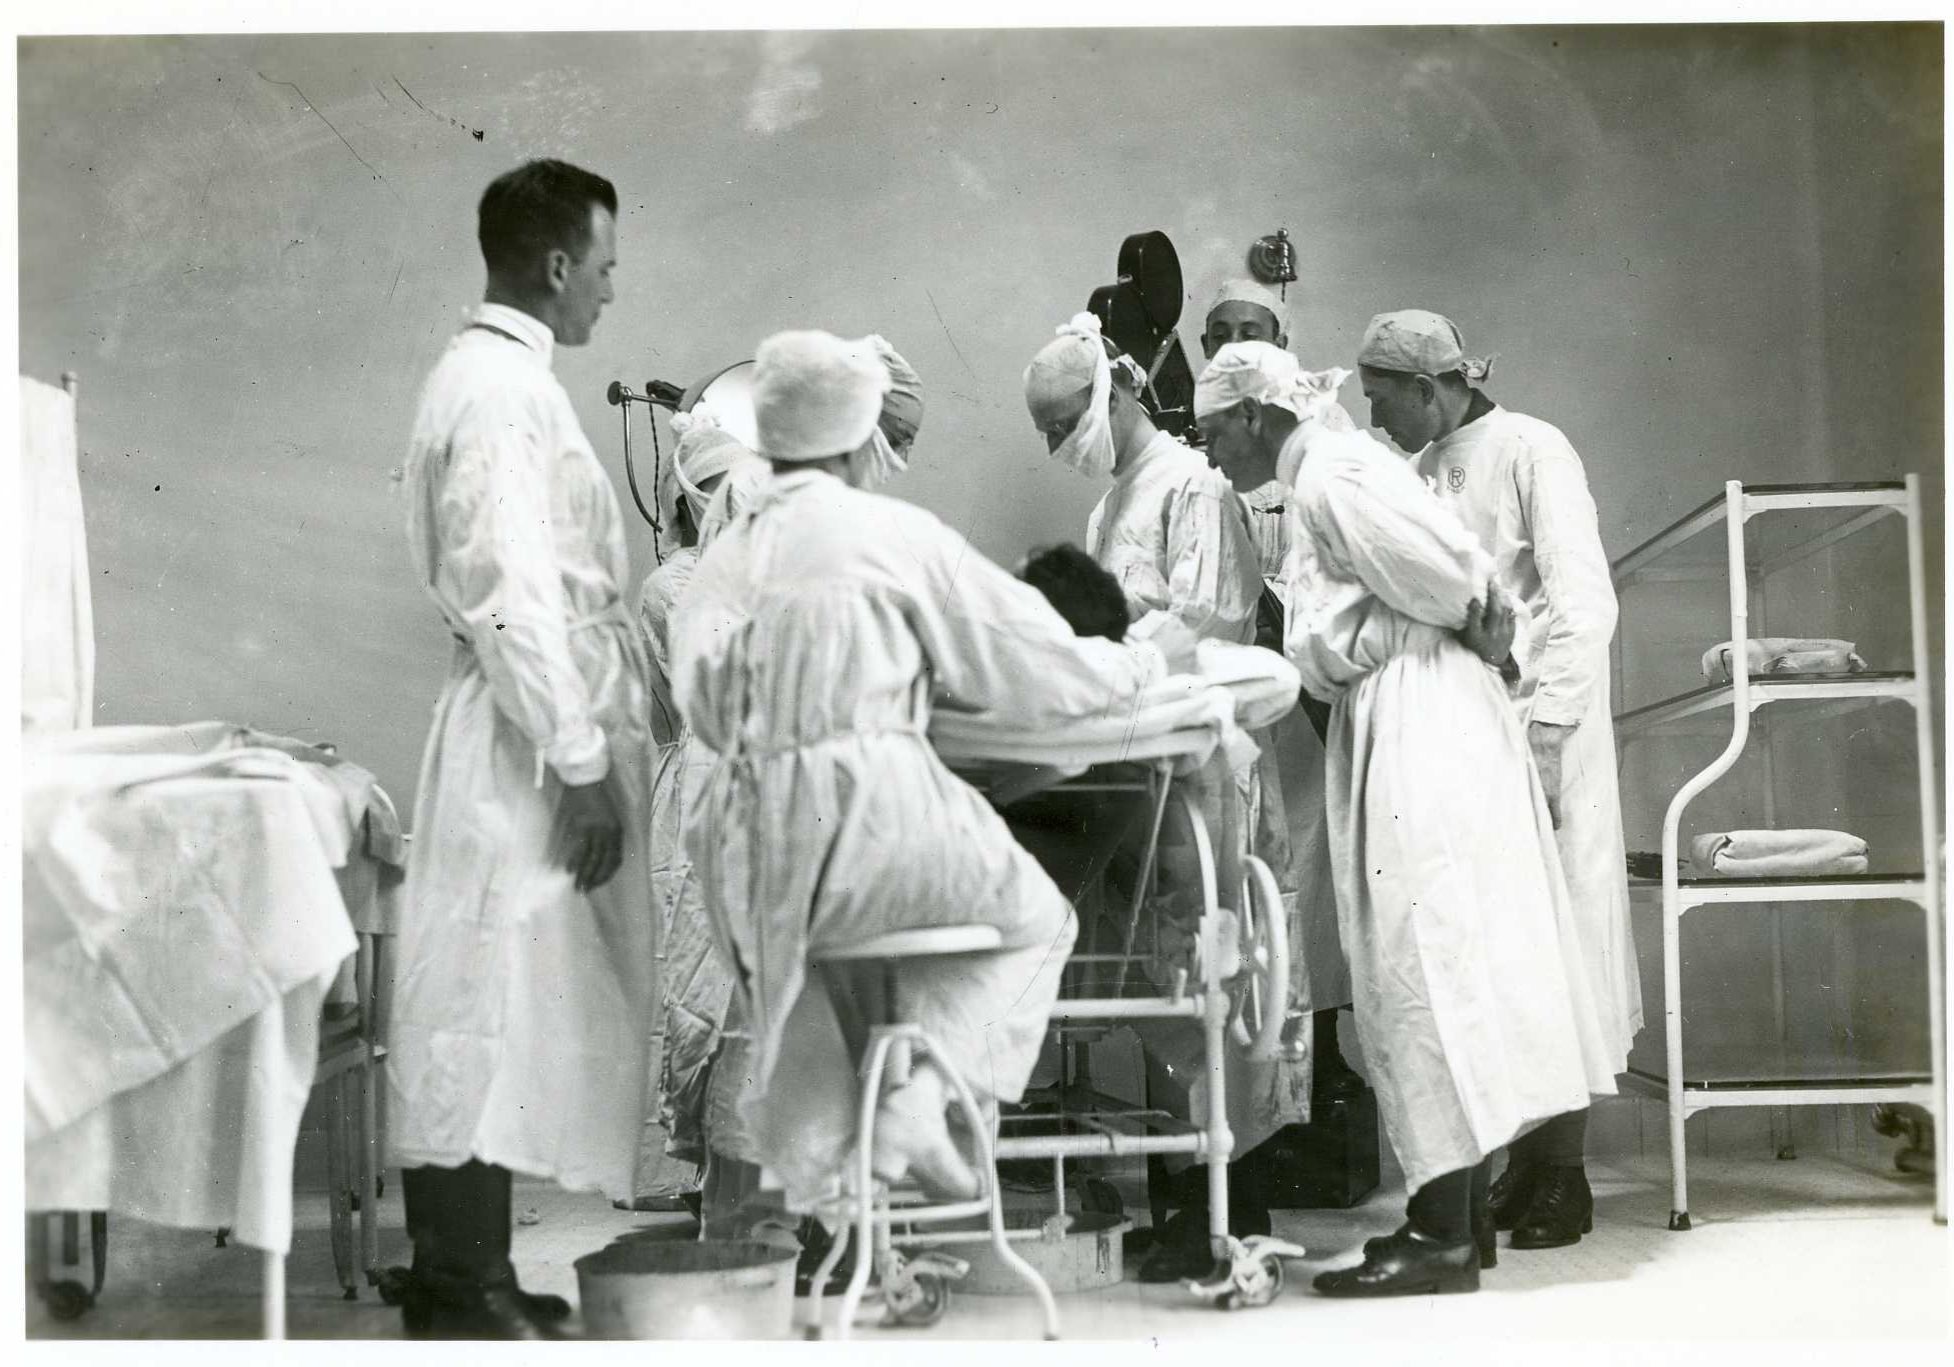 old image of doctors and nurses gathered around operating table.